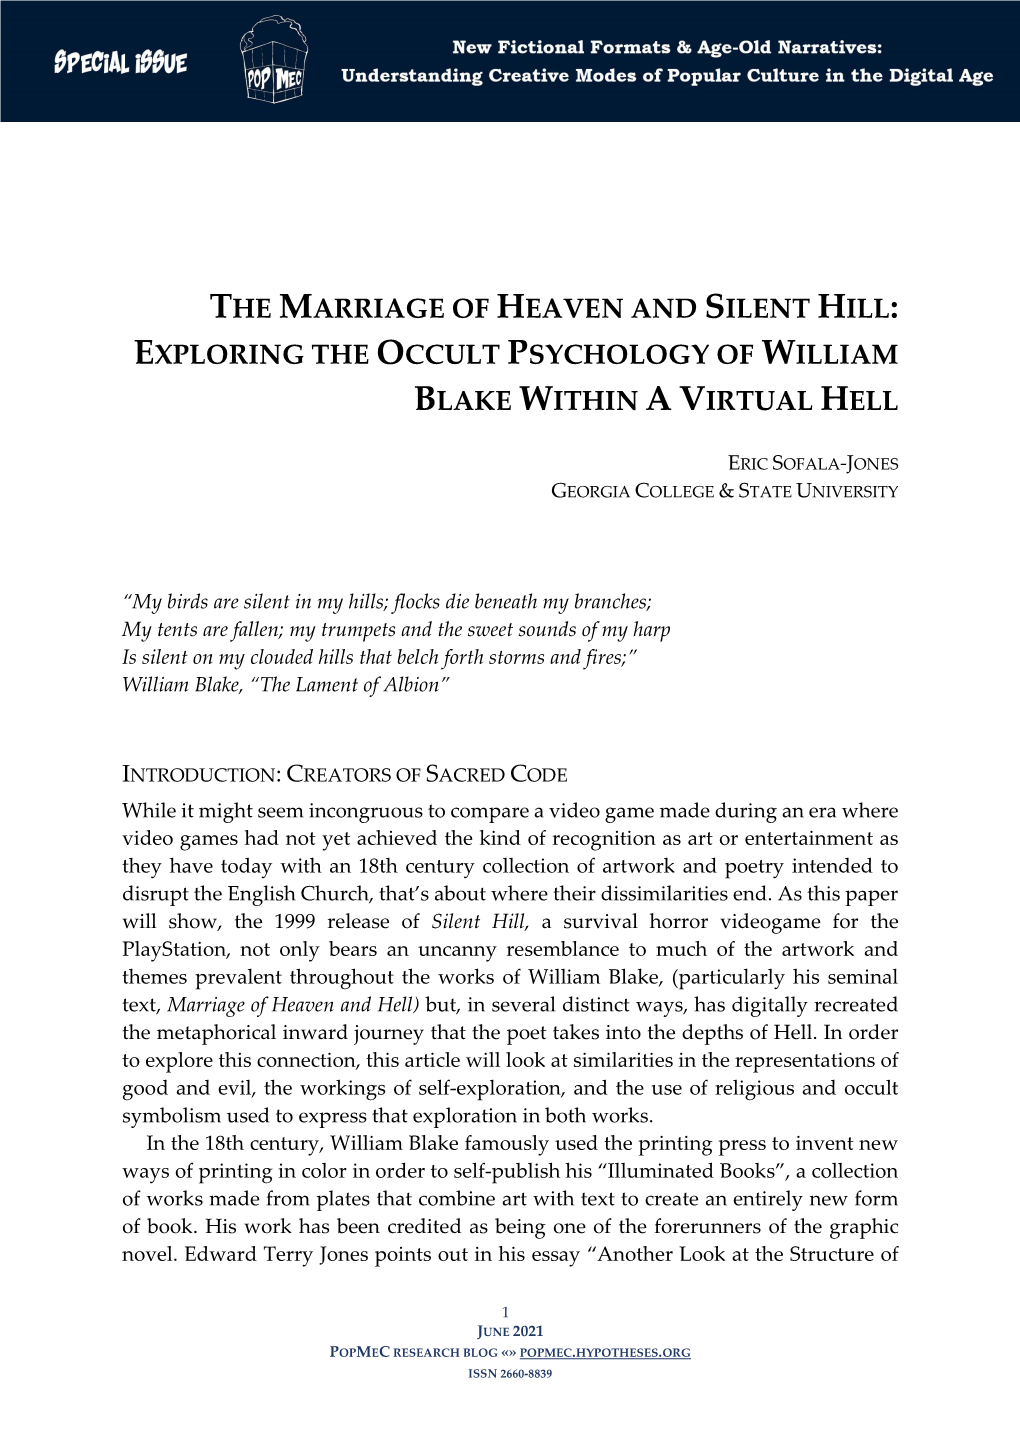 The Marriage of Heaven and Silent Hill: Exploring the Occult Psychology of William Blake Within a Virtual Hell